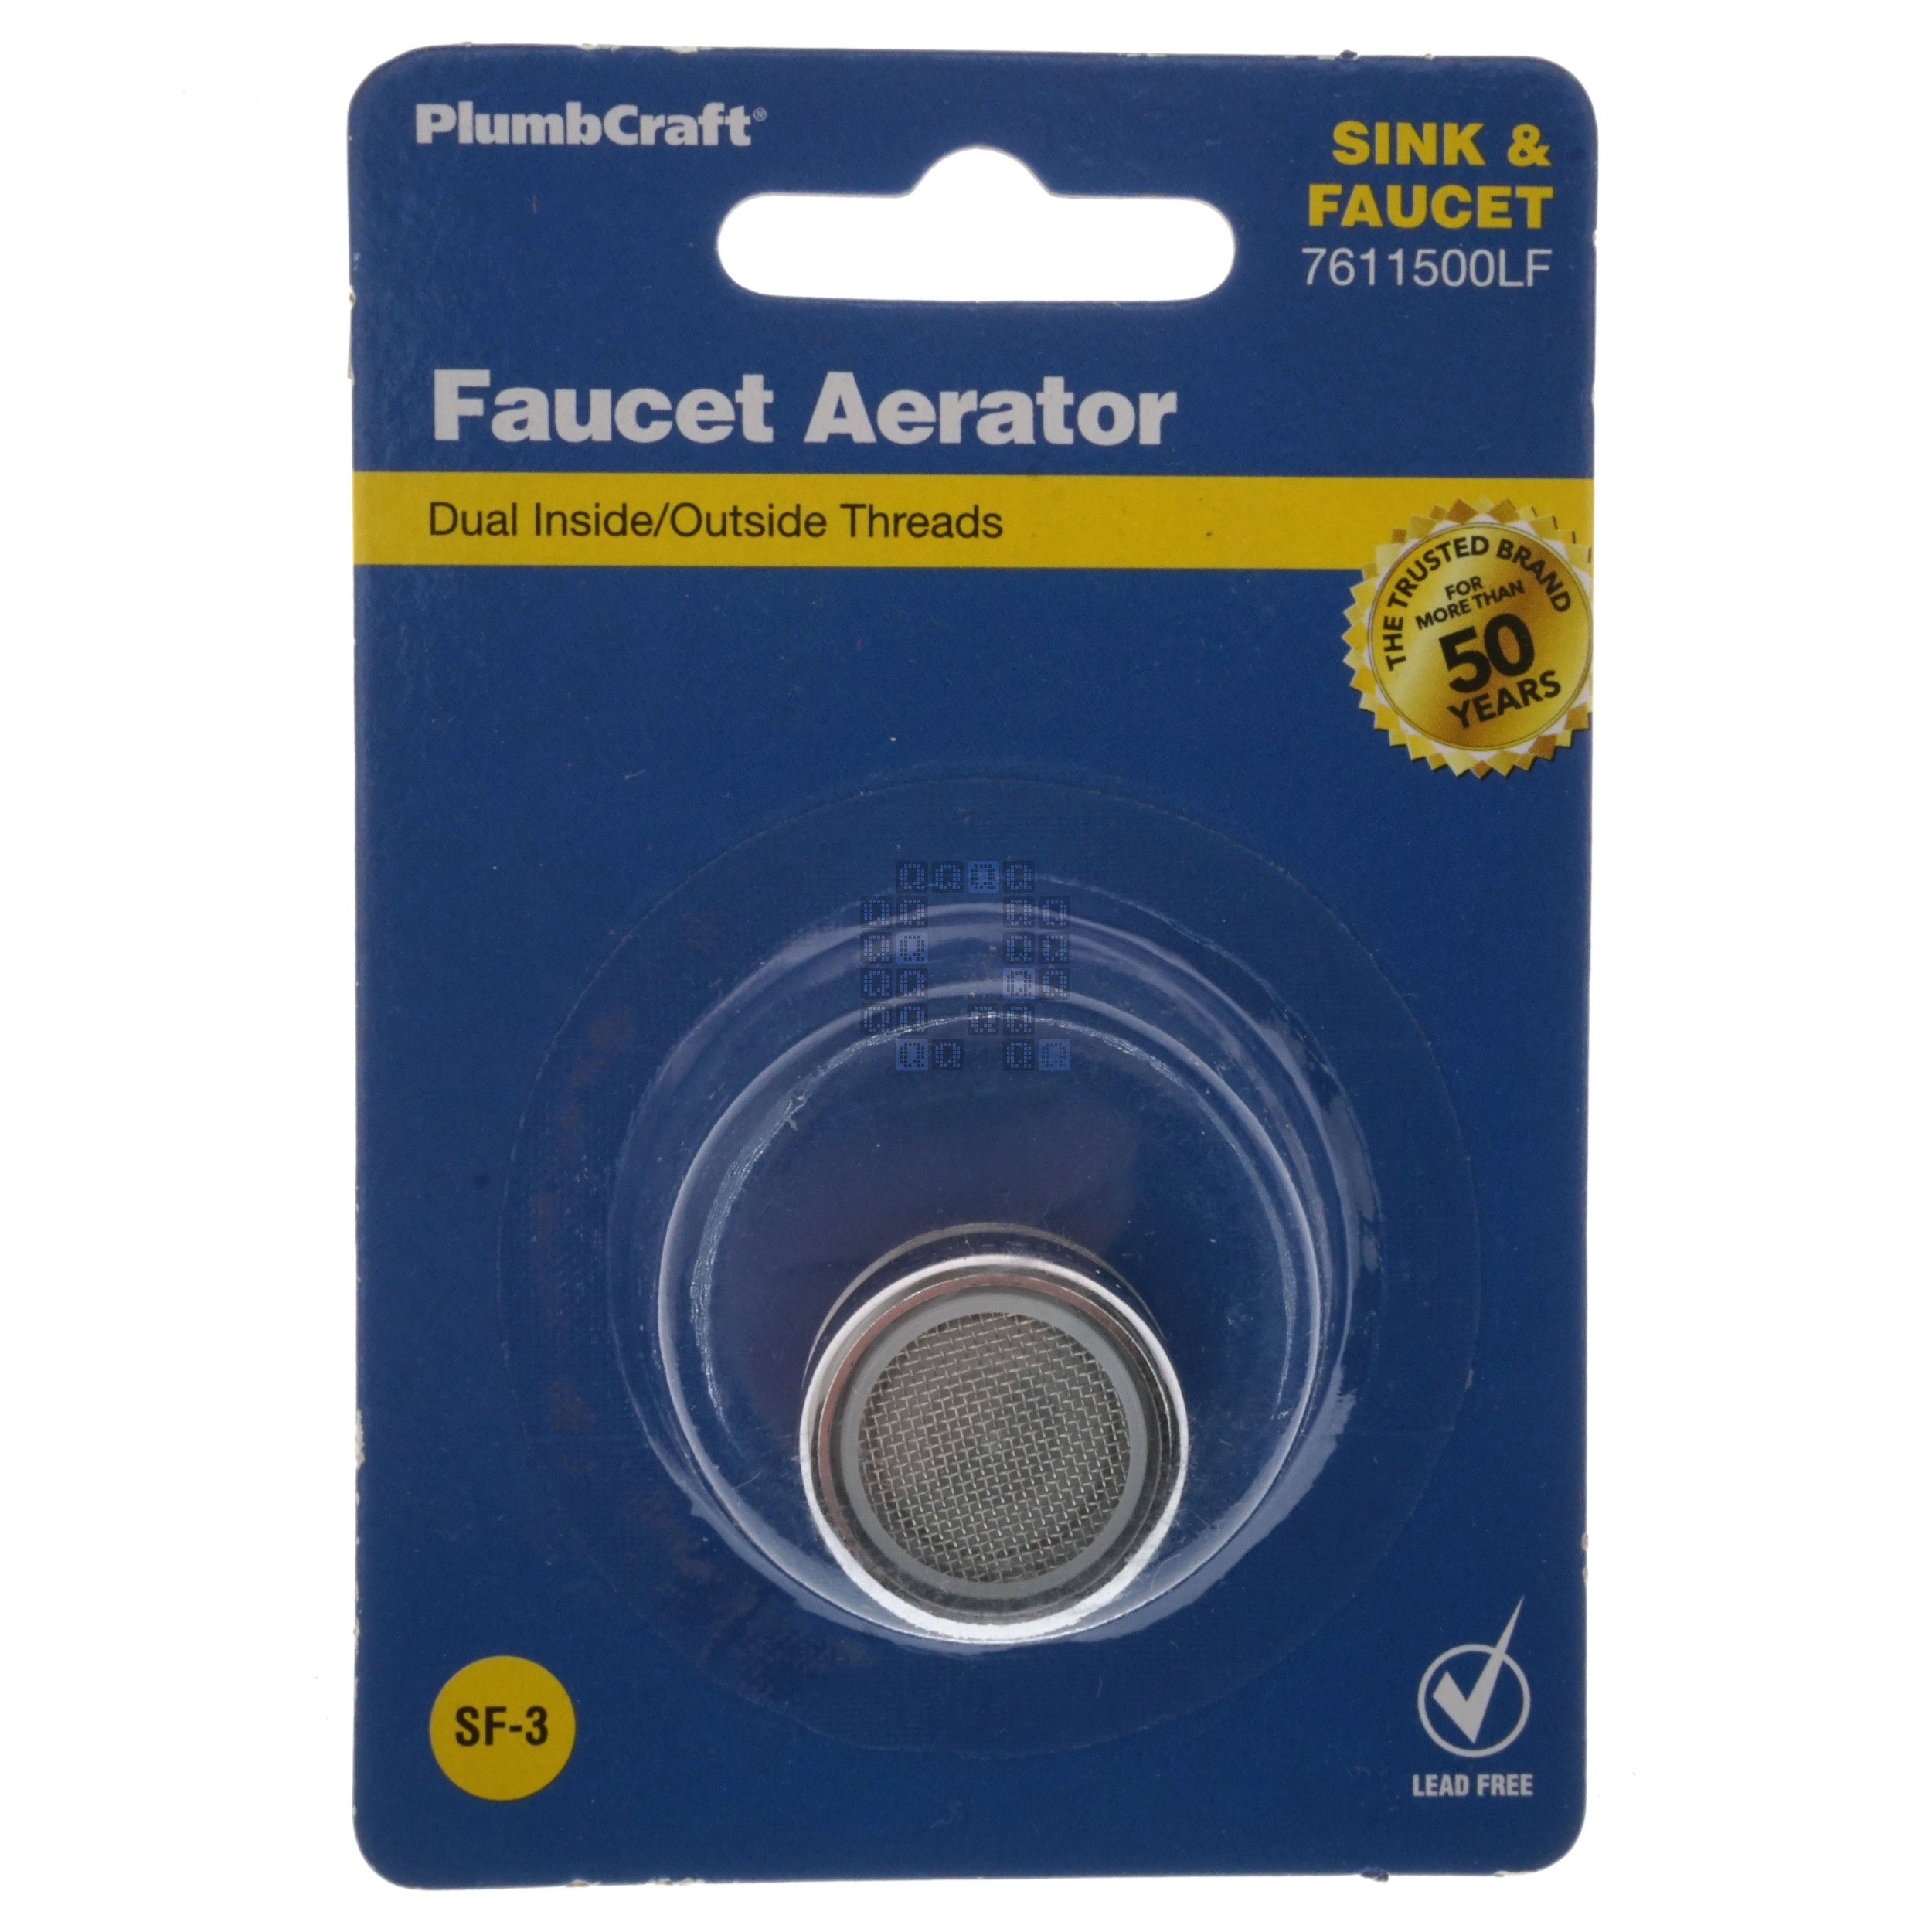 PlumbCraft 7611500LF Faucet Aerator, Dual Inside/Outside Threads, Chrome Plated